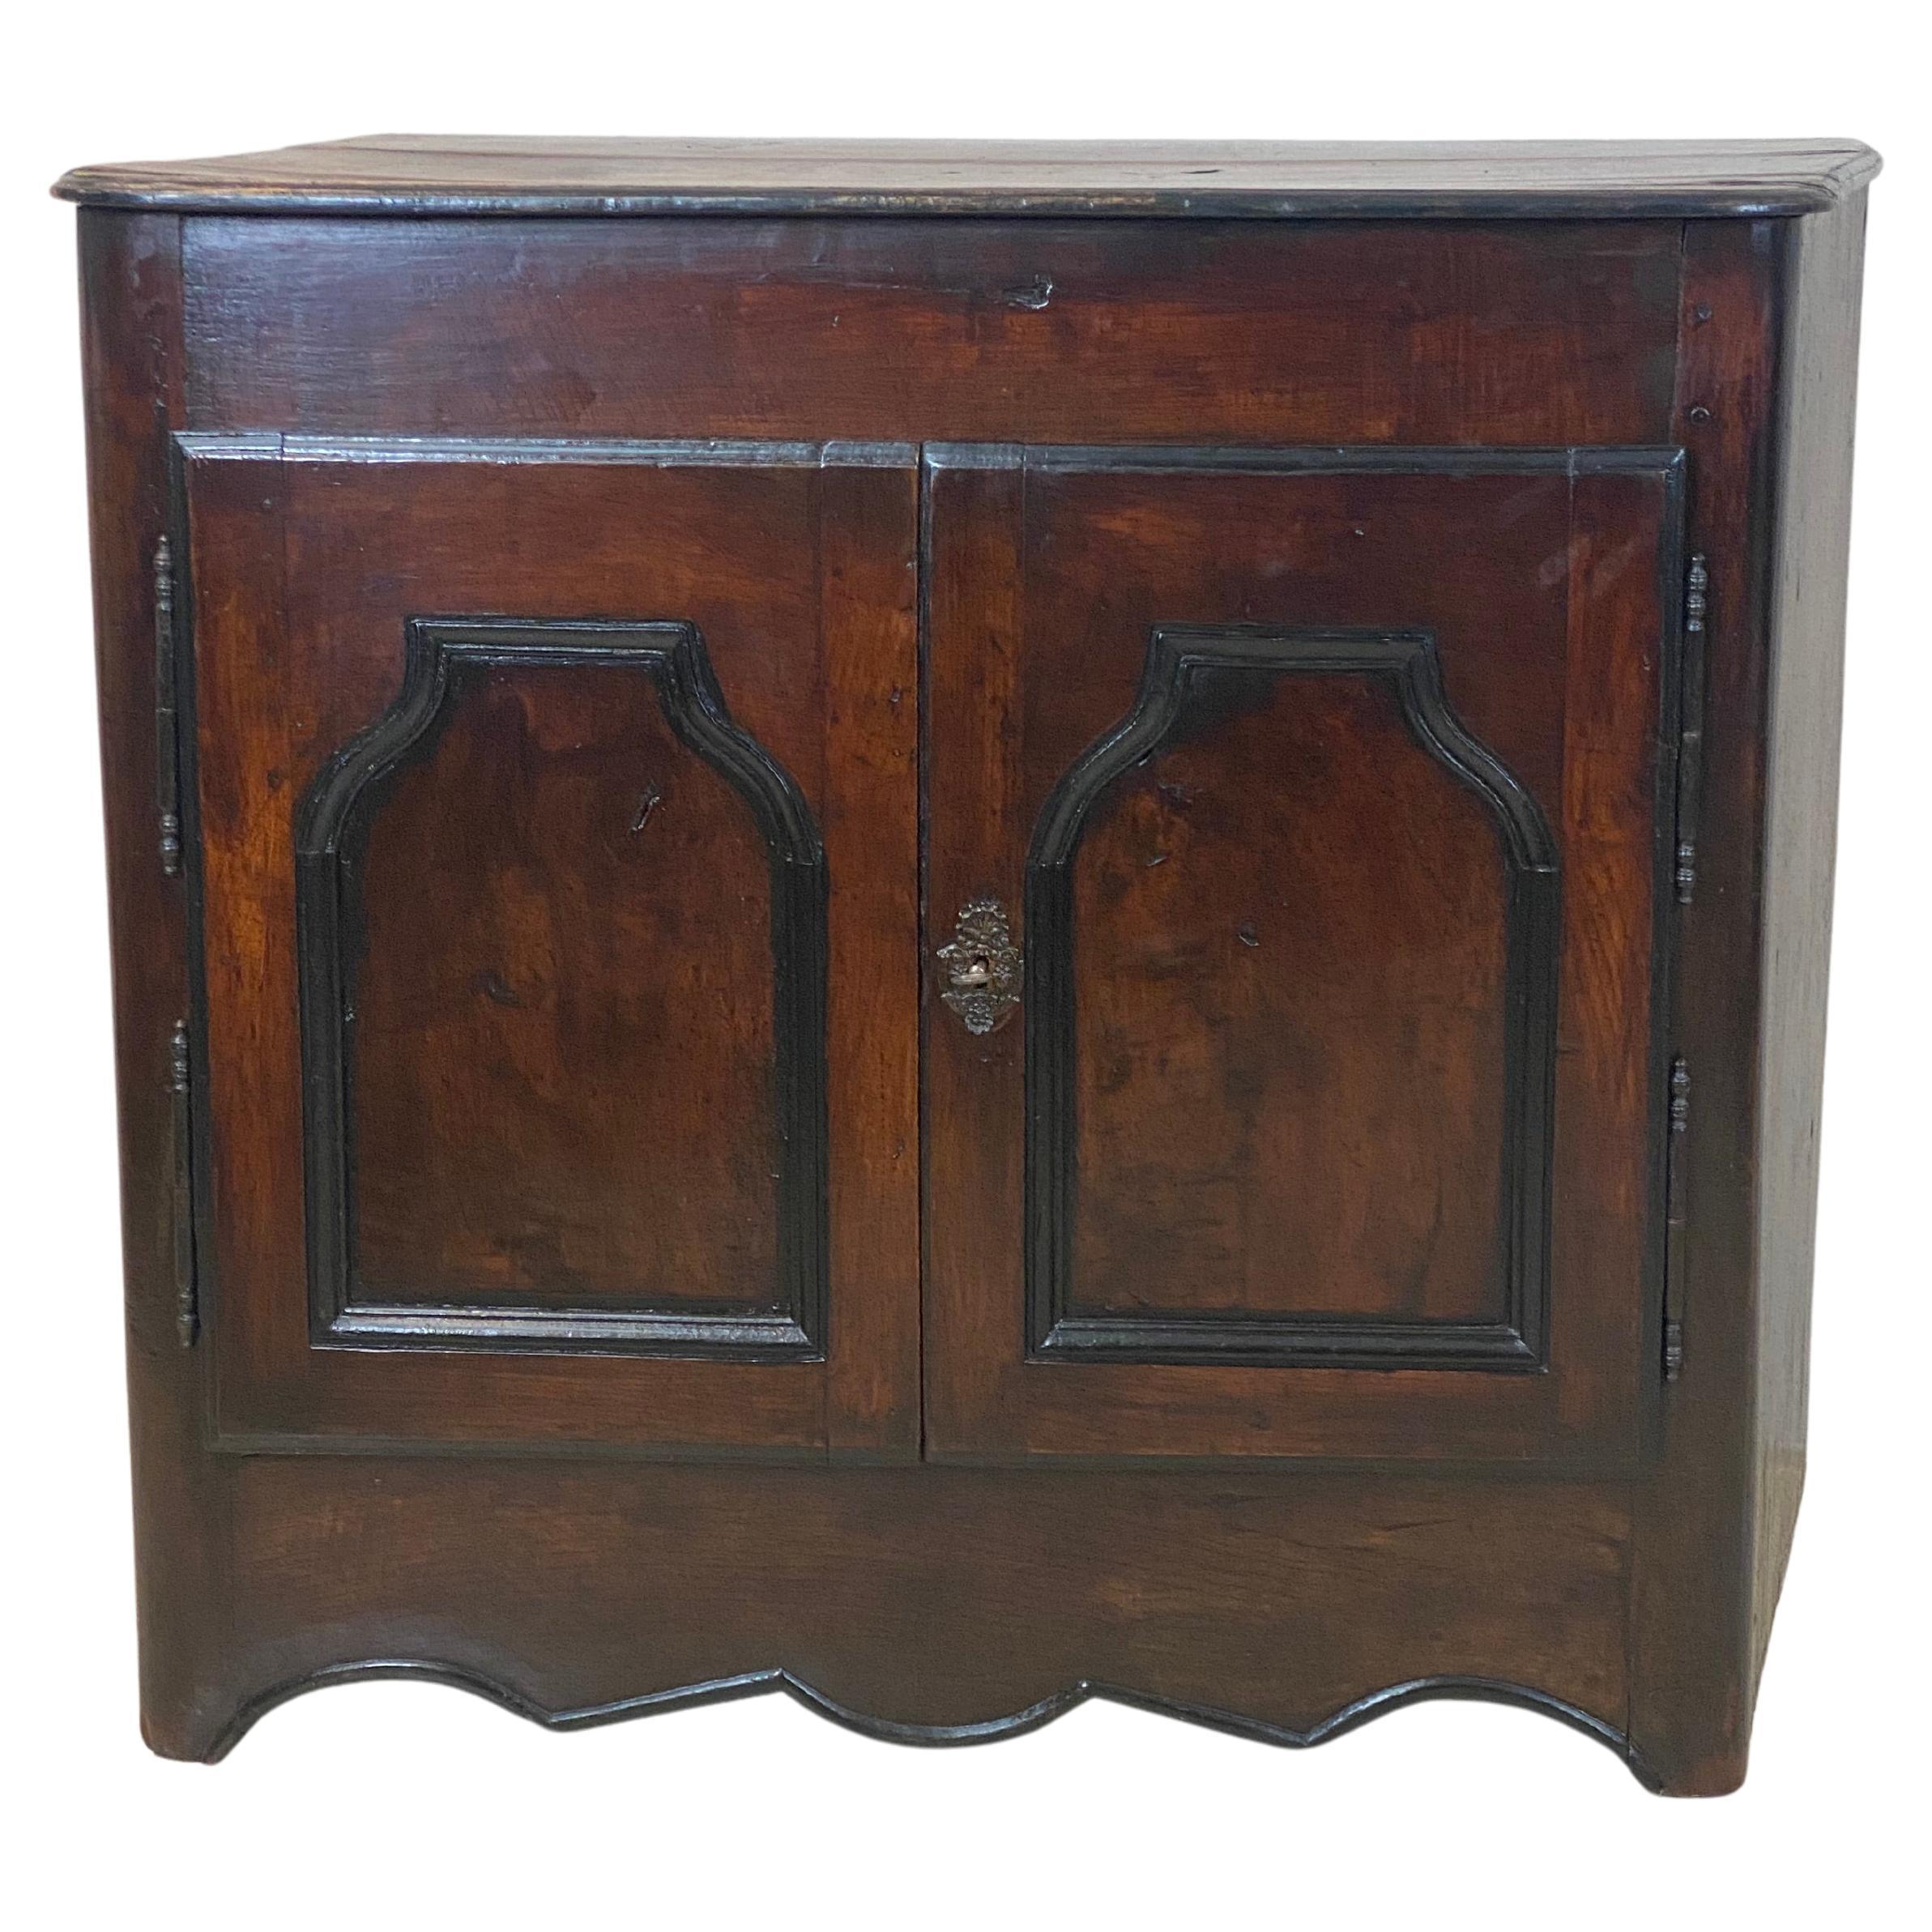 Small French Country Style Antique Cabinet with 2 doors in a dark wood 